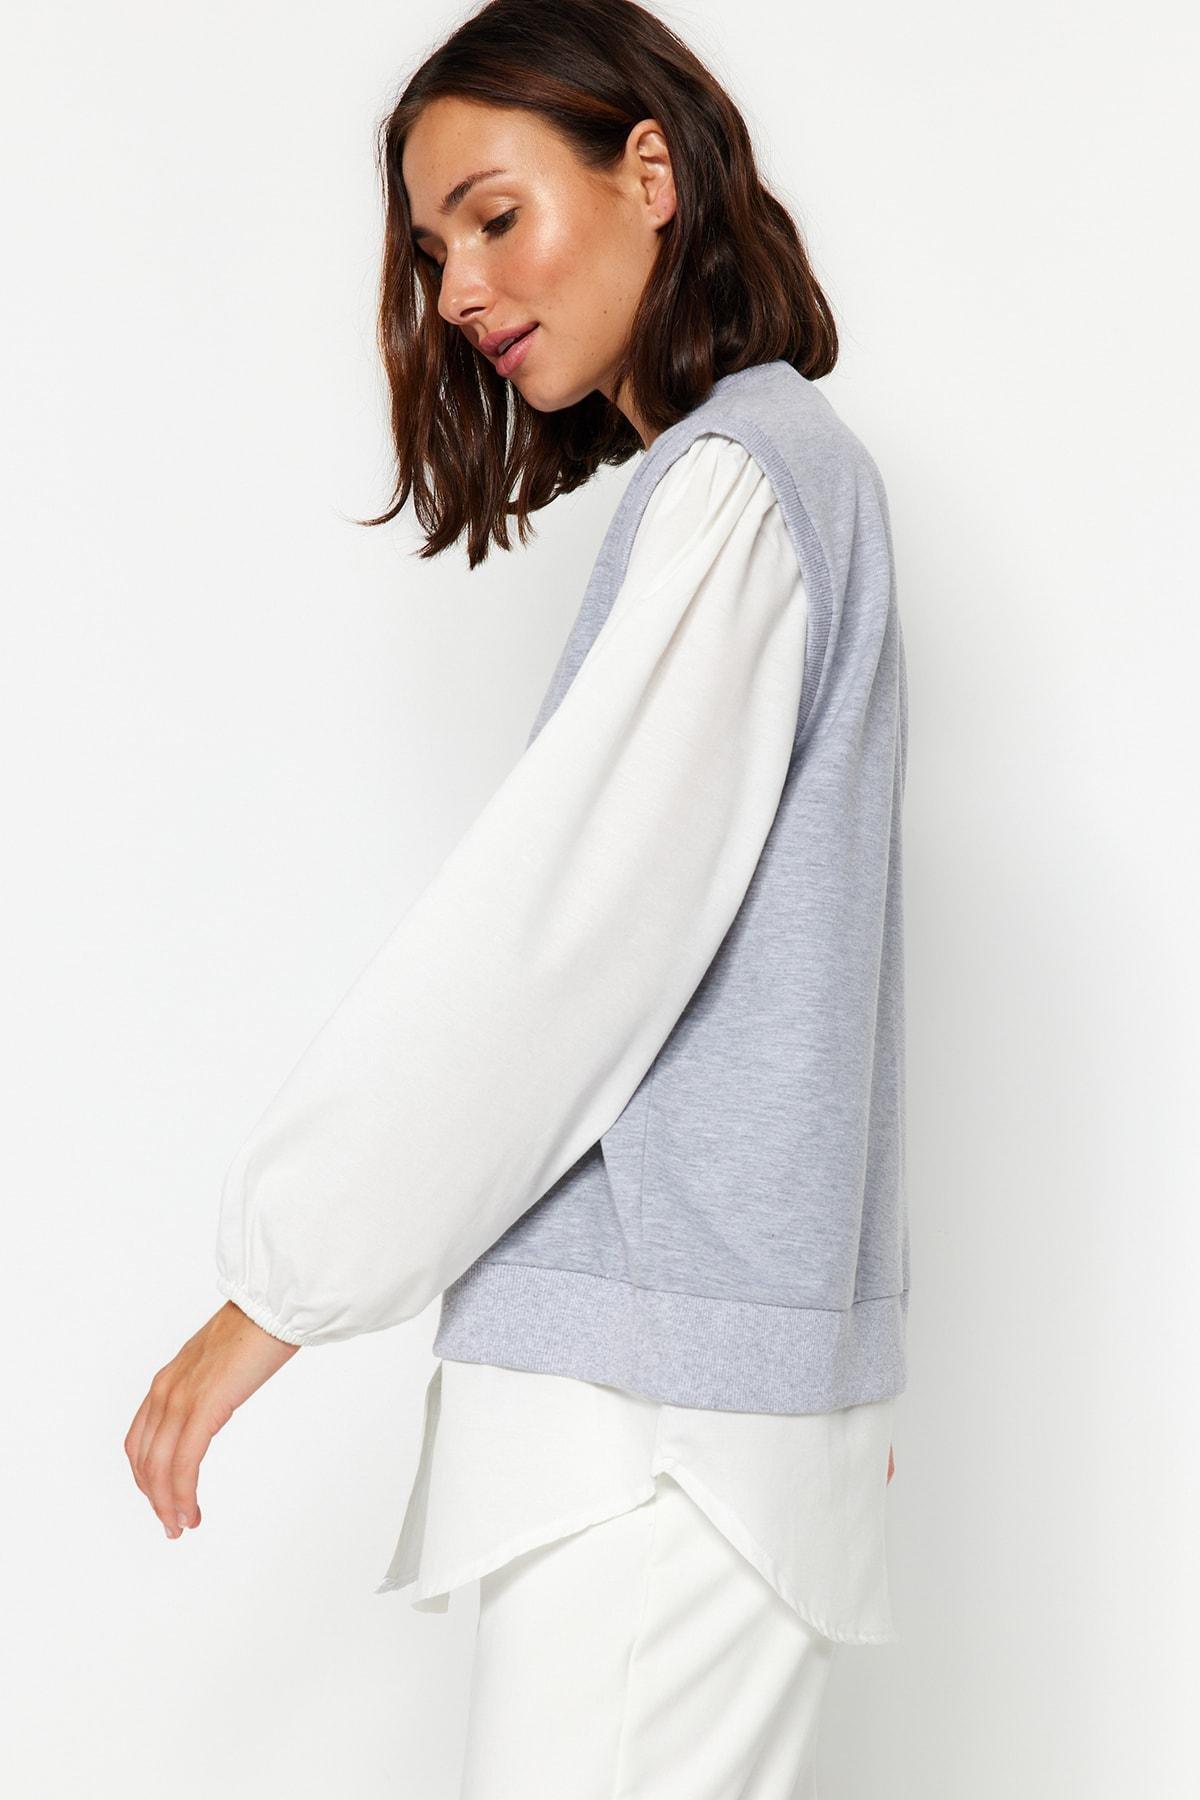 Trendyol - Grey Knitted Tunic Sweater